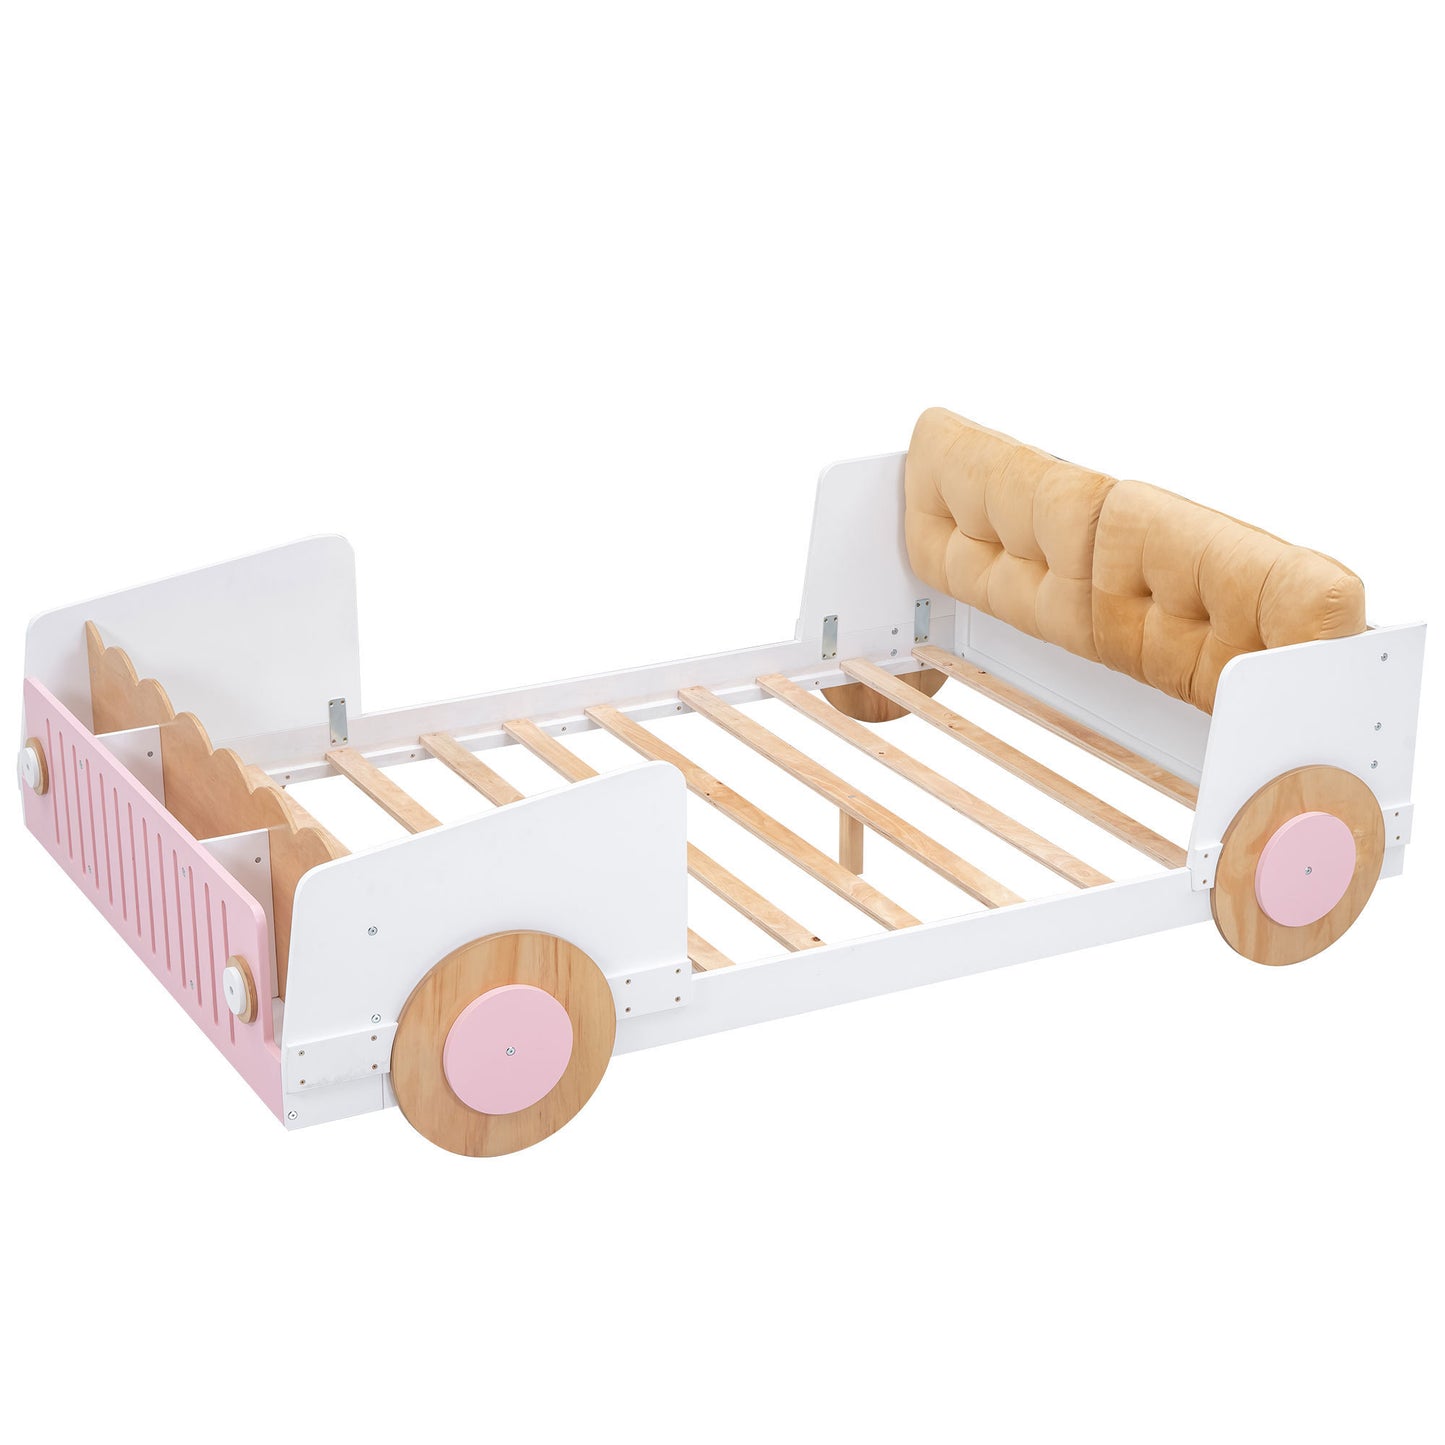 Full size Car-shaped platform bed with Soft cushion and shelves on the footboard, White